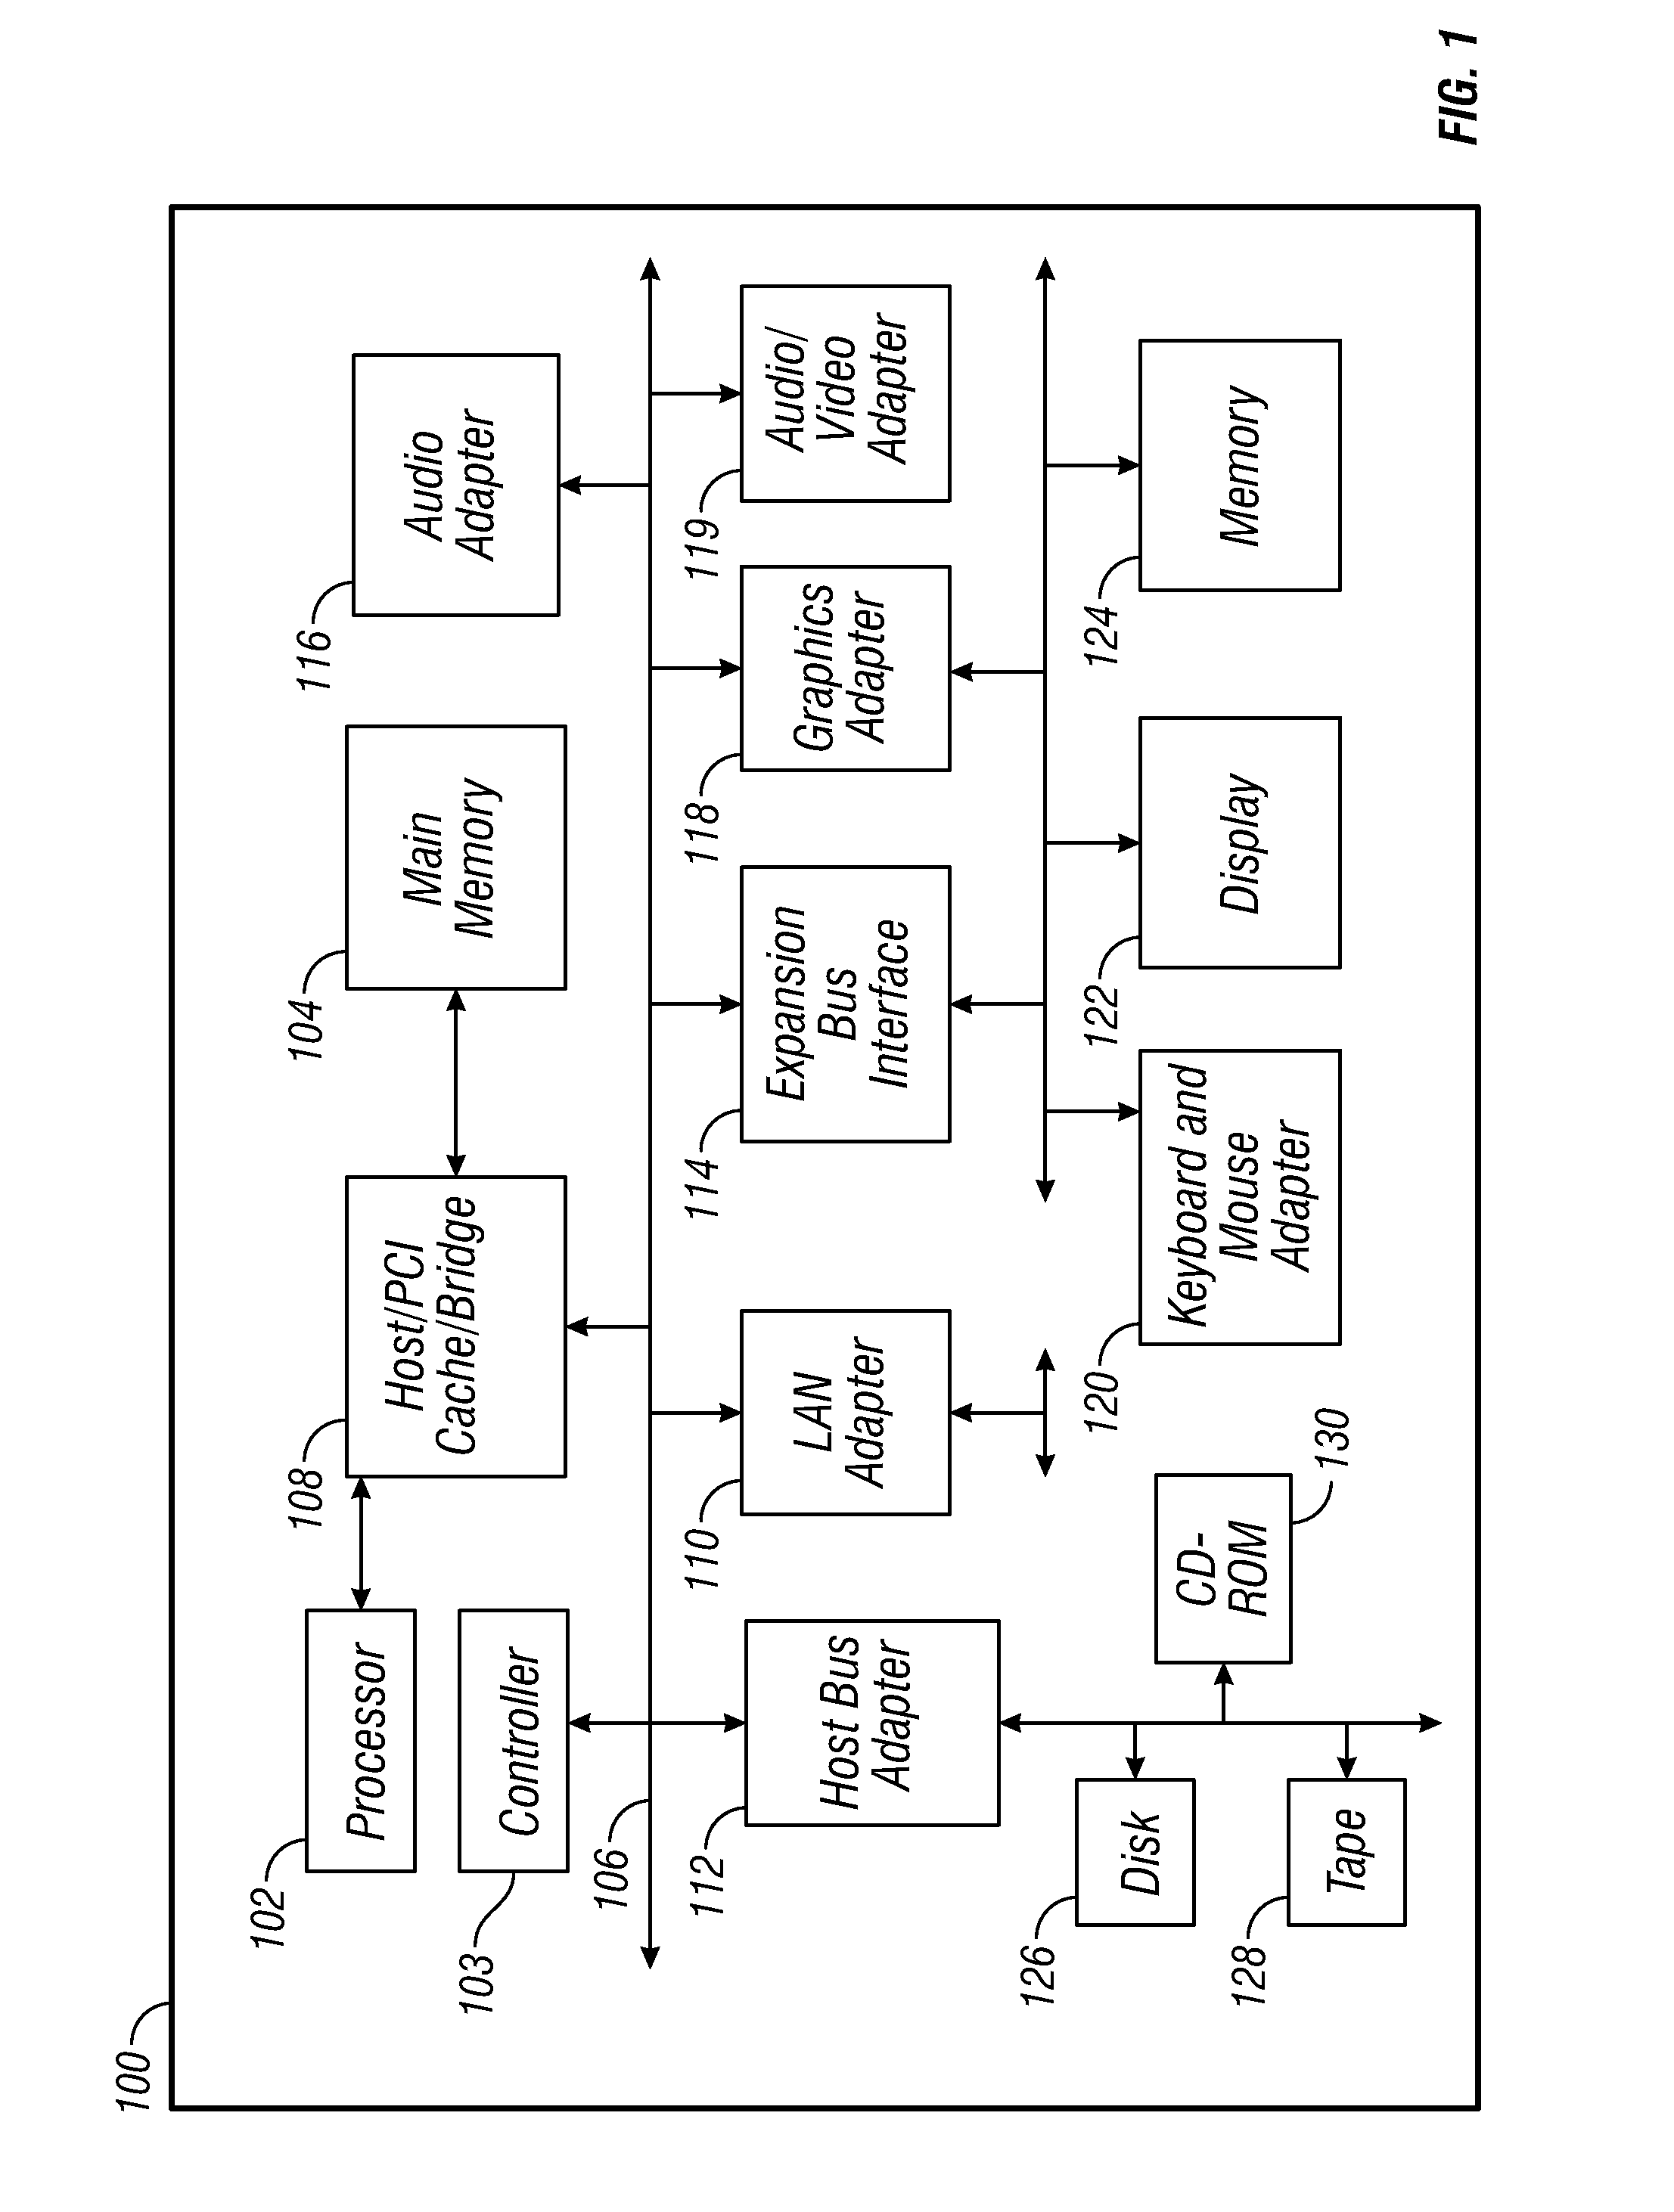 Methods and systems for constructing multi-dimensional data models for distribution networks